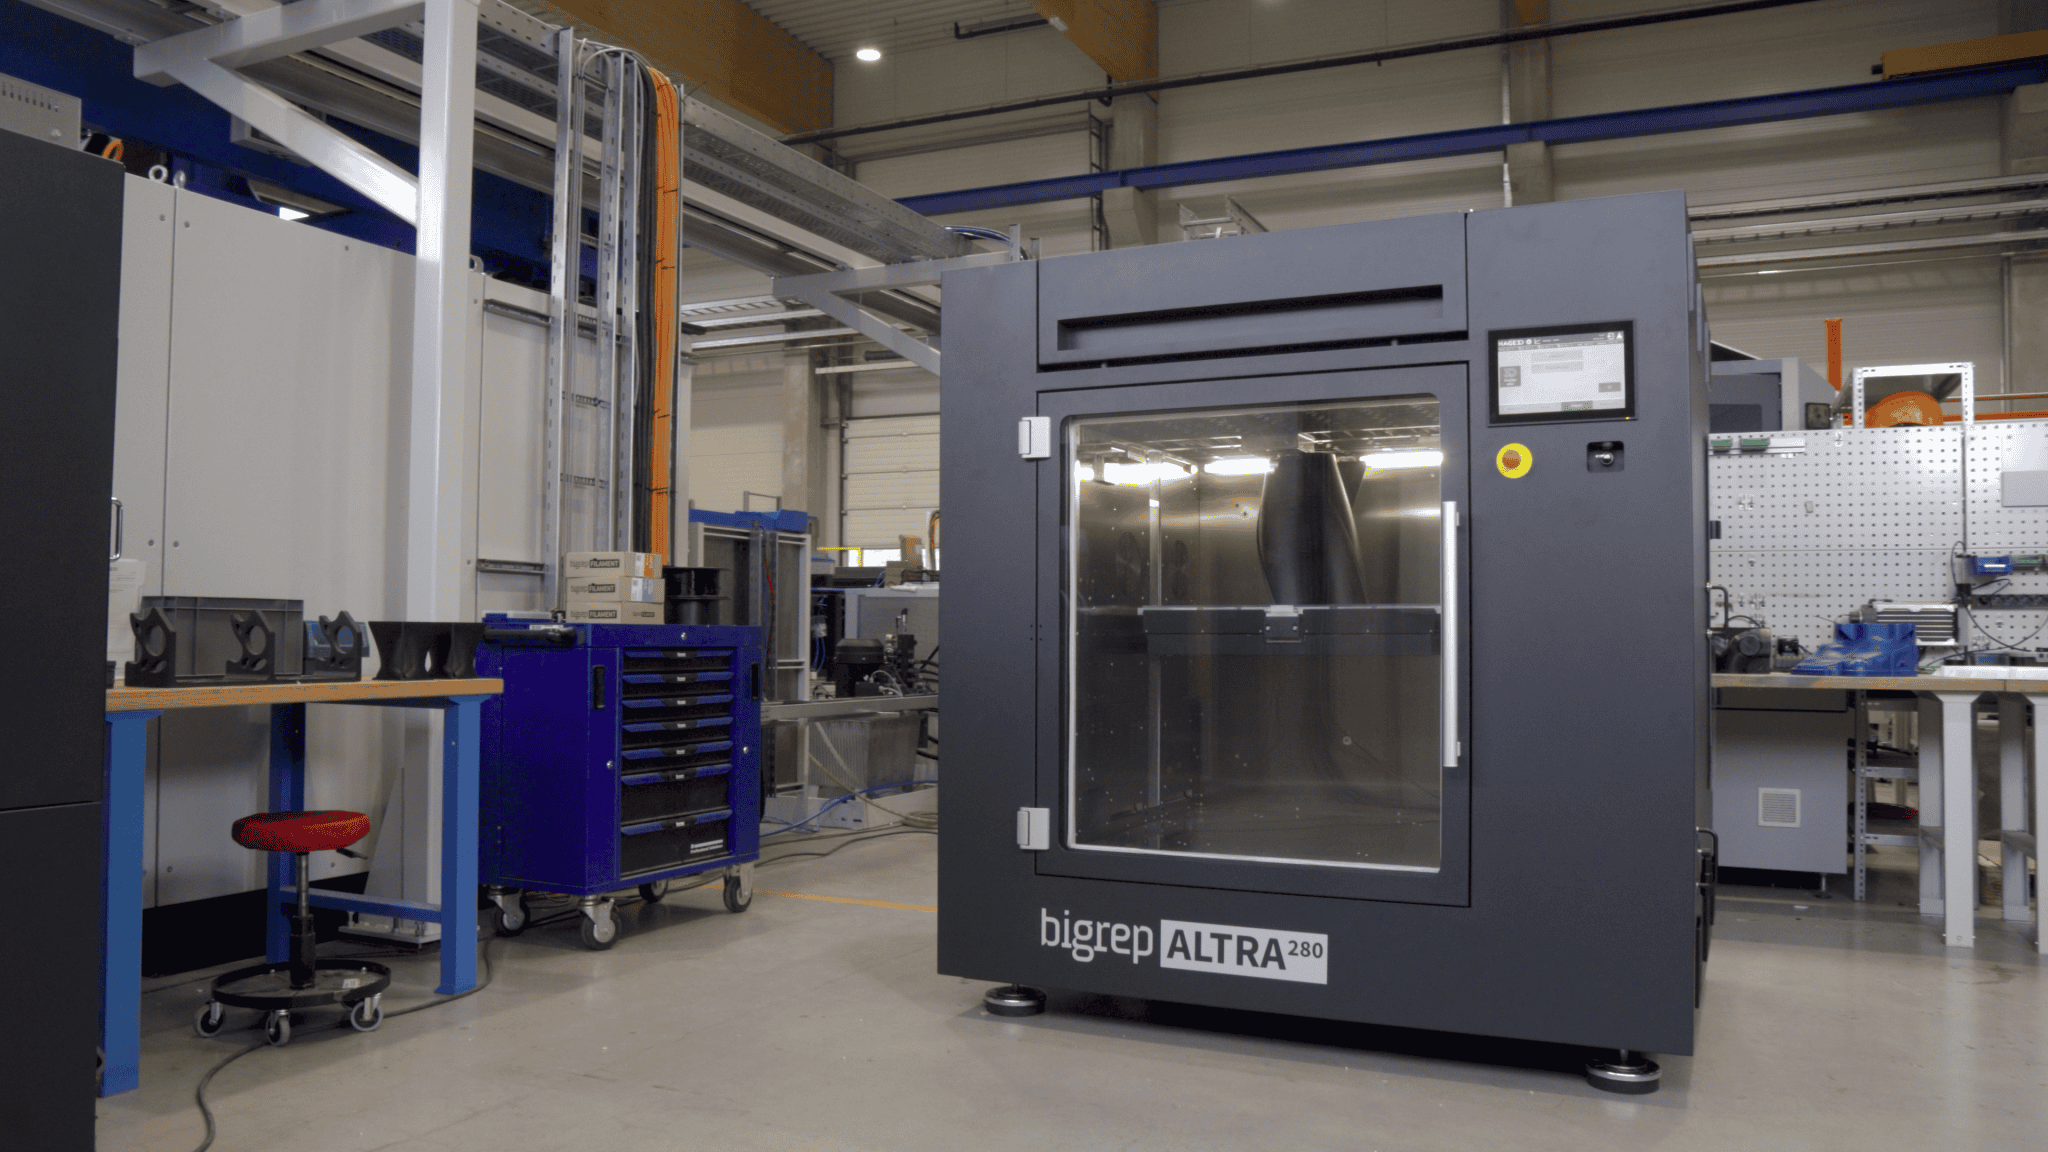 Meet the New ALTRA 280: The Ultimate High-Temp Industrial 3D Printer